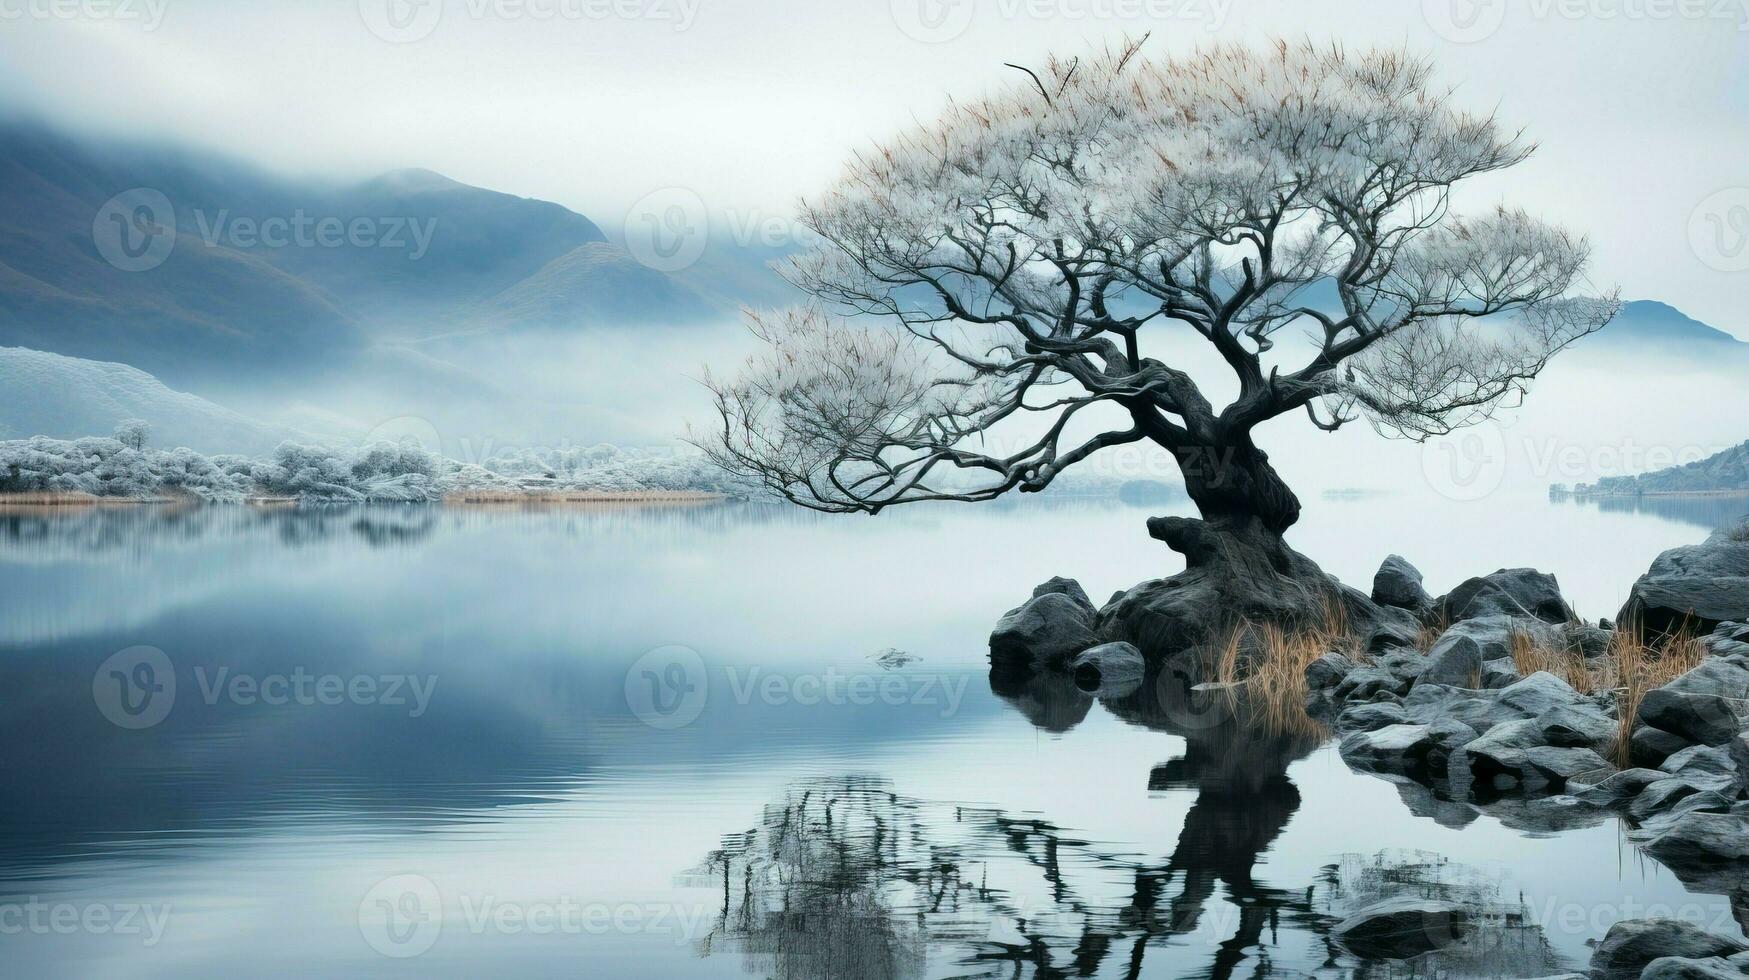 The willow tree is in the middle of a calm lake with a mountain view in the background photo